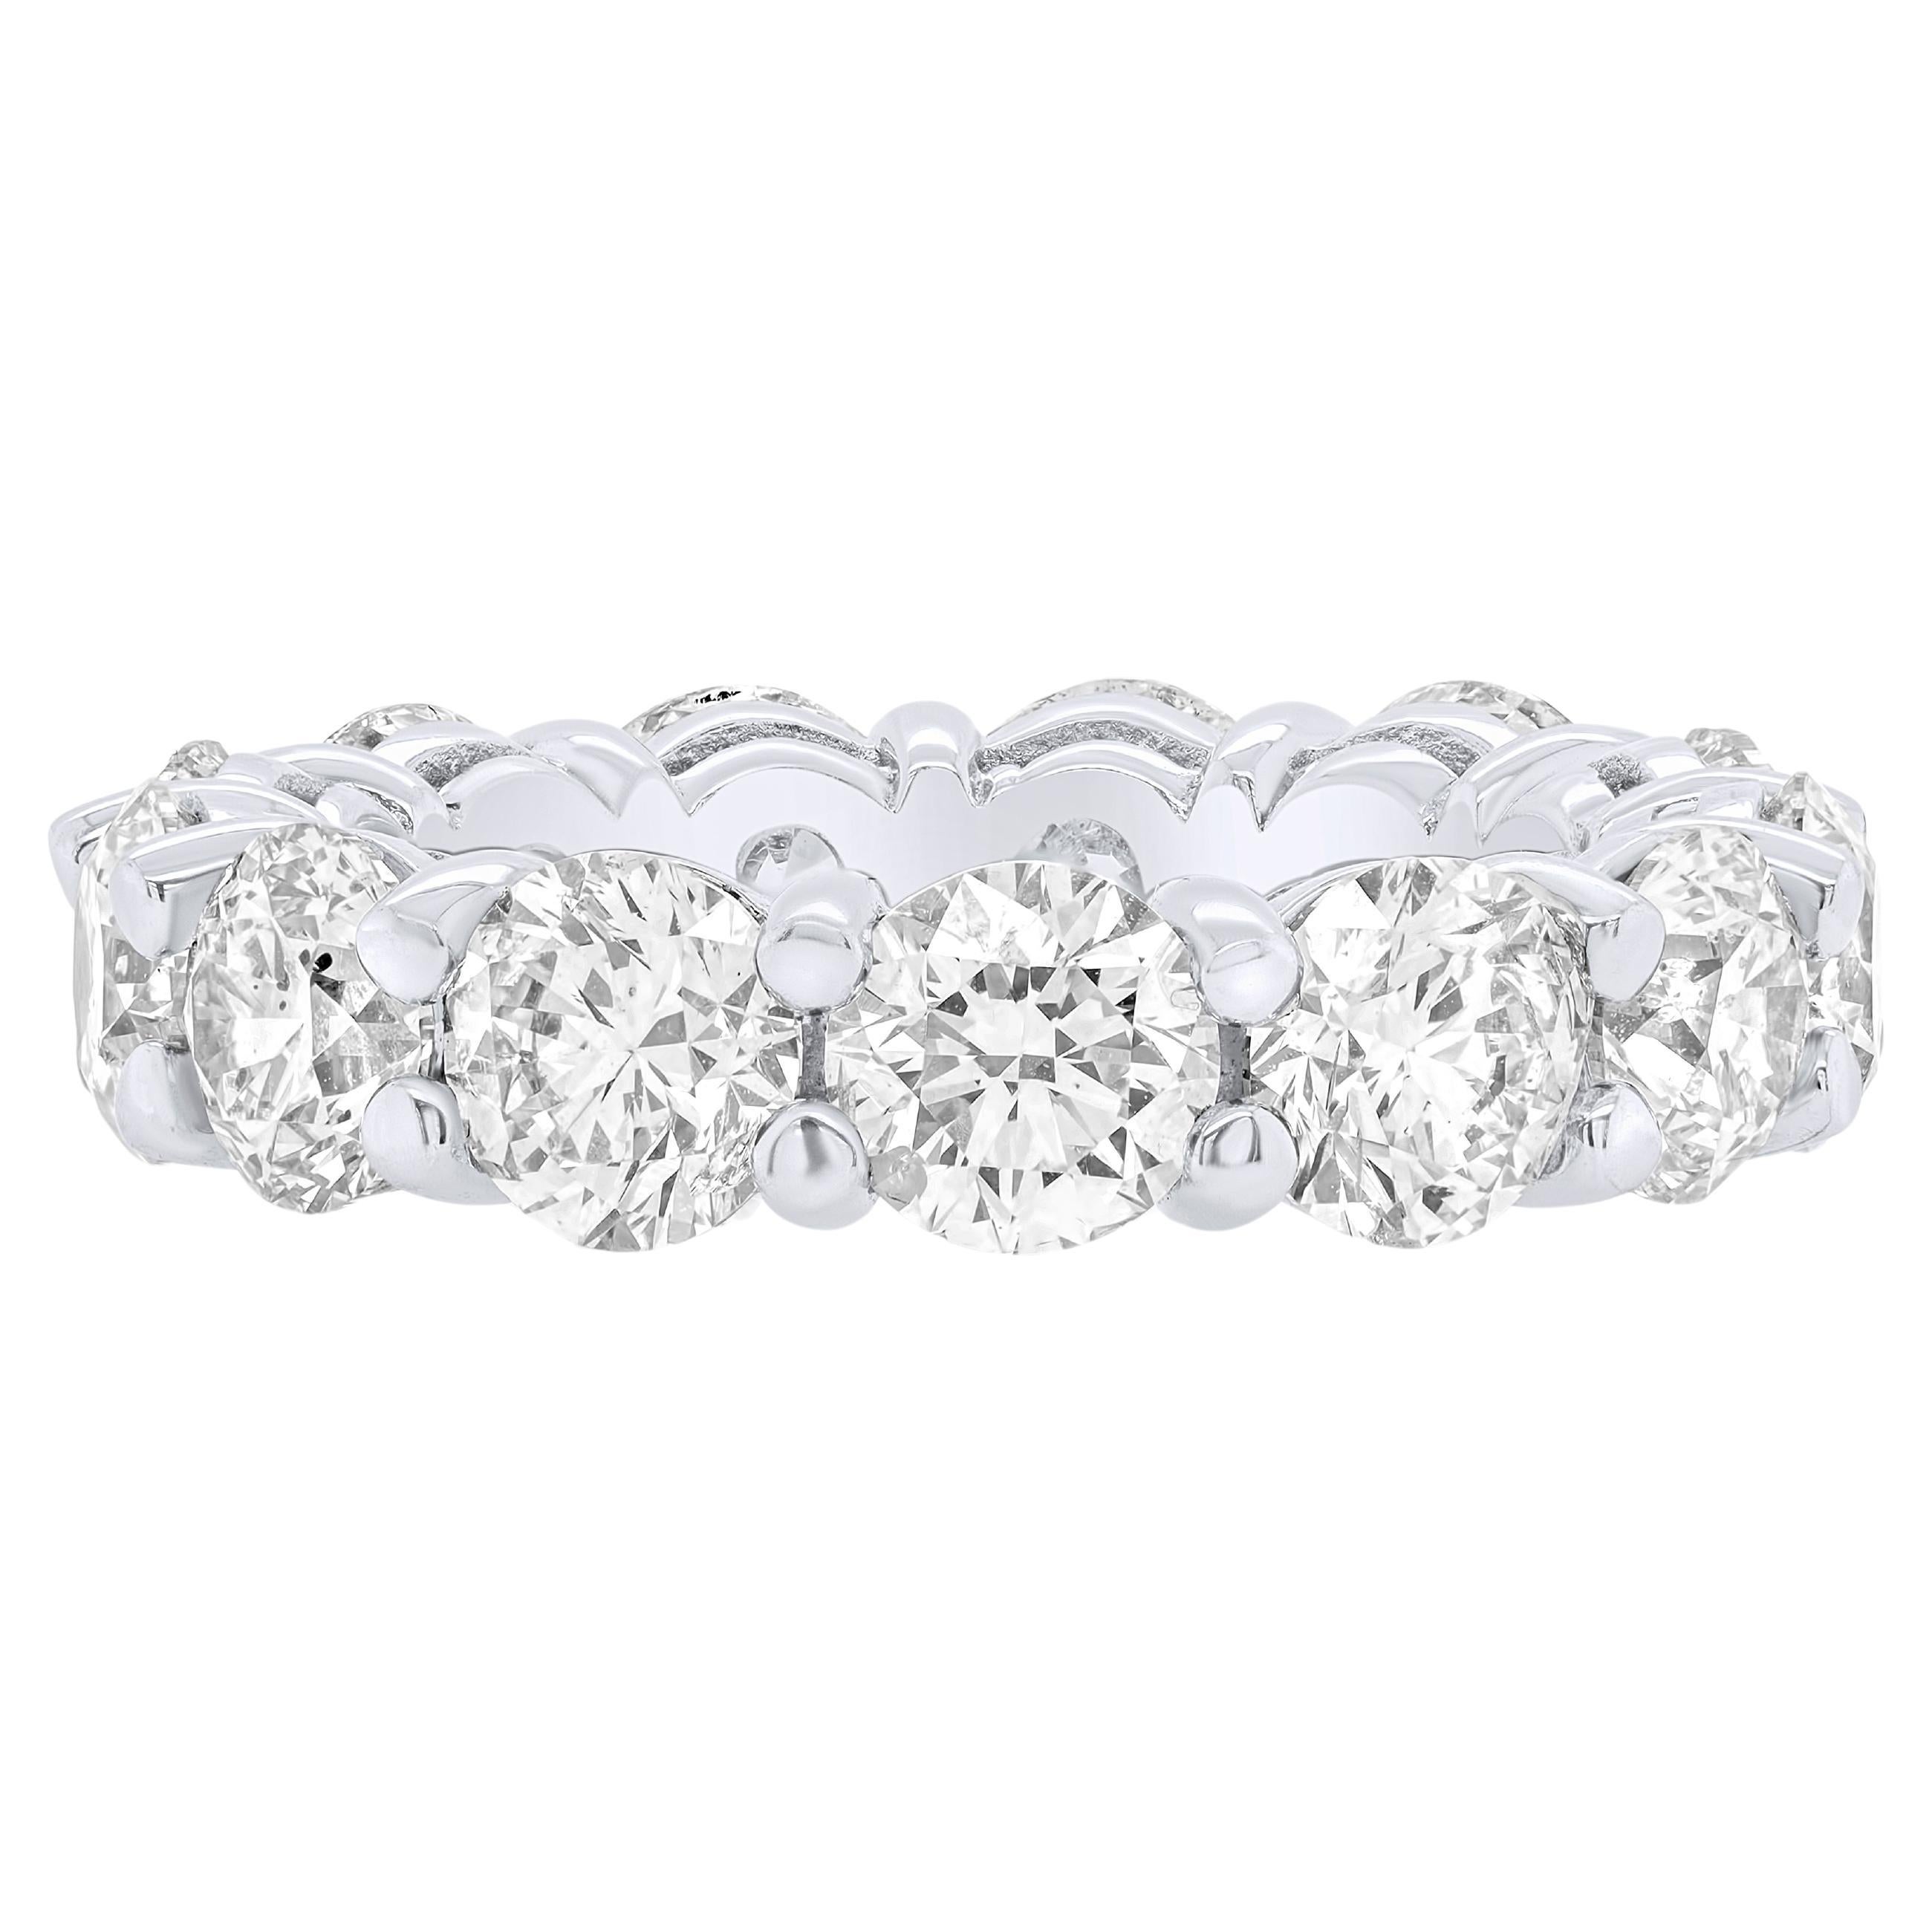  18kt white gold all the way around diamond eternity band feature 4. 55ct of round diamonds.
Diana M. is a leading supplier of top-quality fine jewelry for over 35 years.
Diana M is one-stop shop for all your jewelry shopping, carrying line of